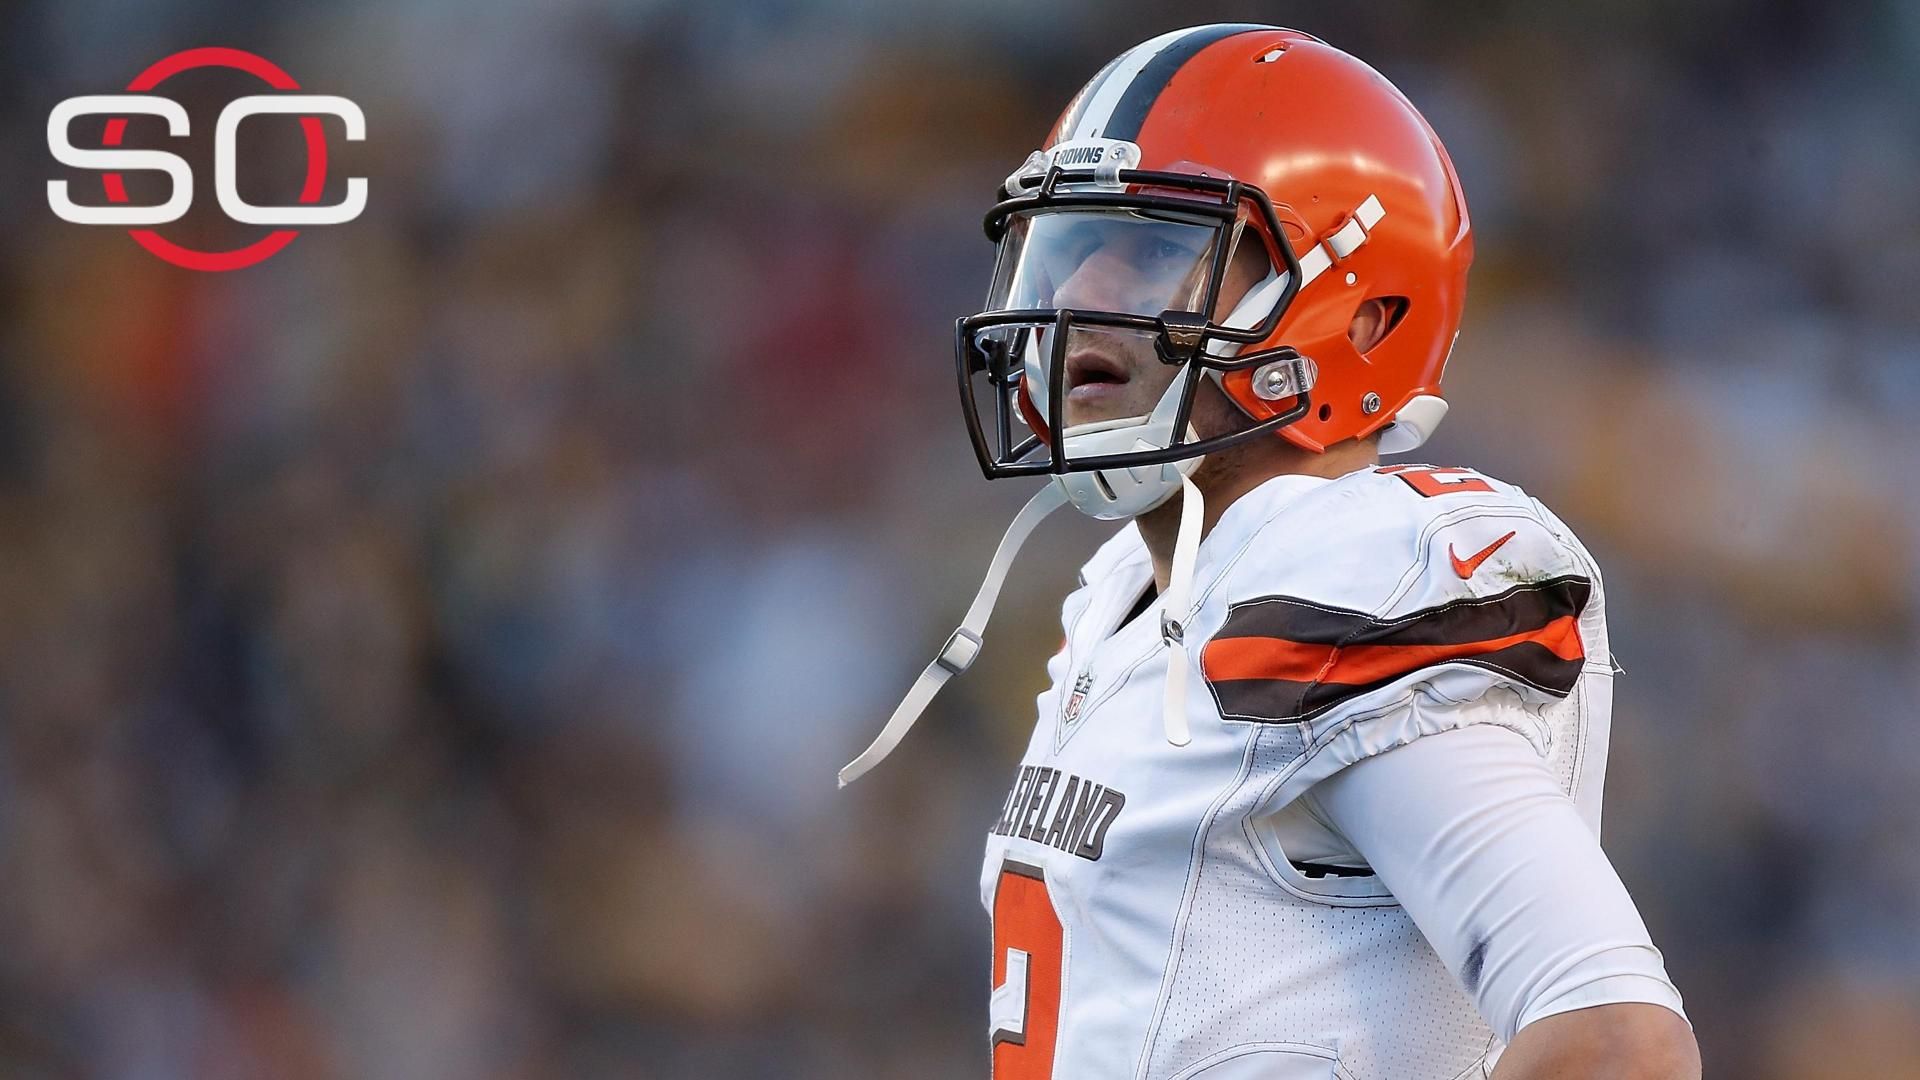 Does Manziel have a future in the NFL?